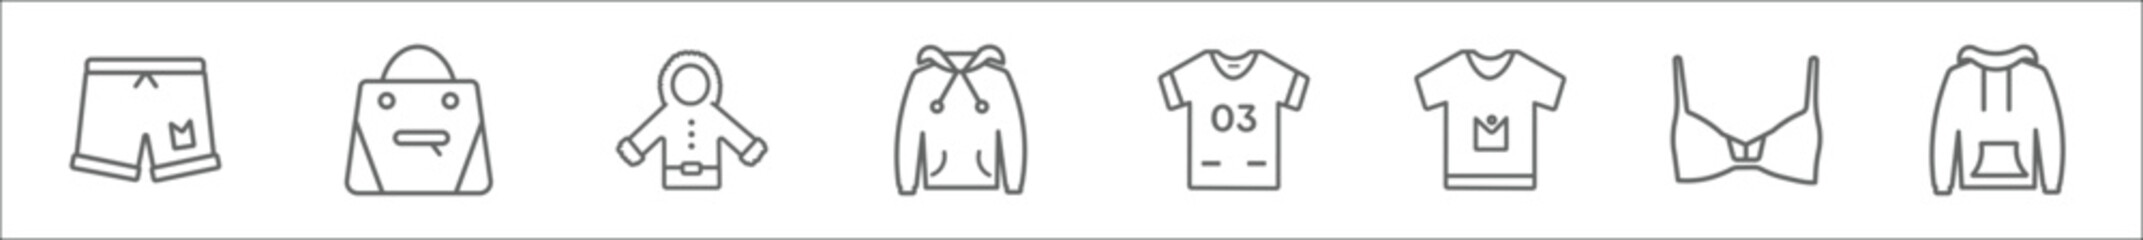 outline set of clothes line icons. linear vector icons such as shorts, hand bag, parka, hoodie, jersey, t shirt, bra, sweatshirt